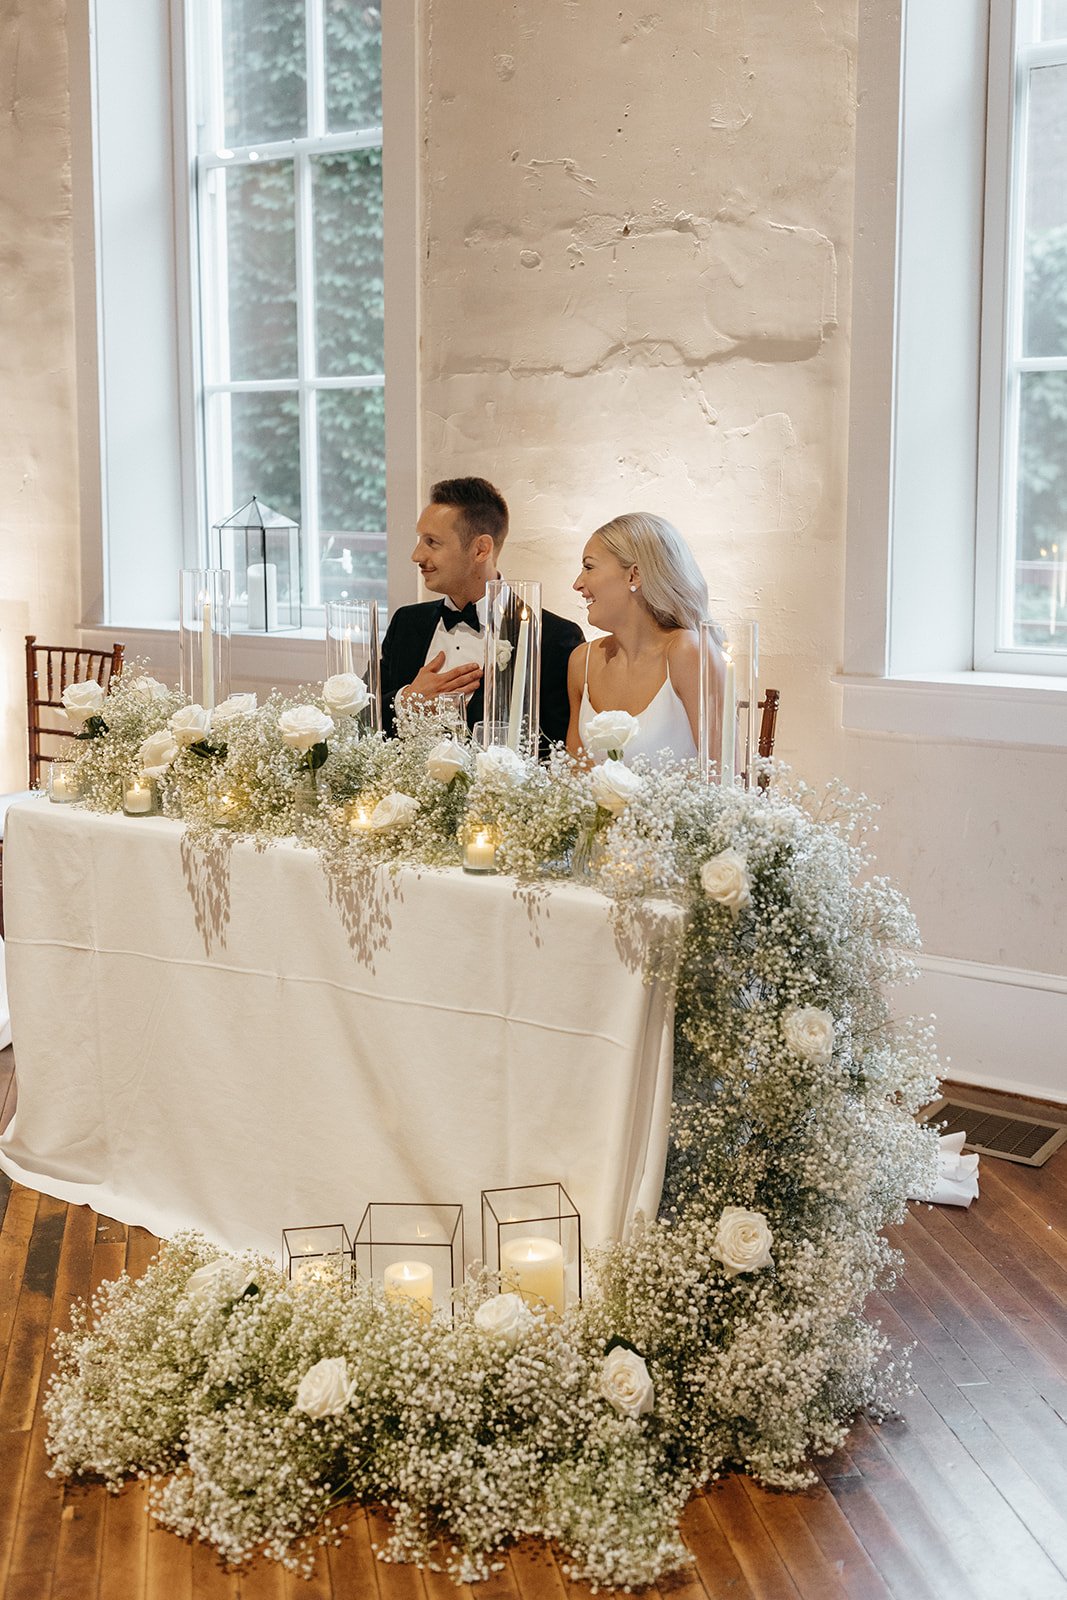 Bride and groom seated at table with large display of baby's breath and candles